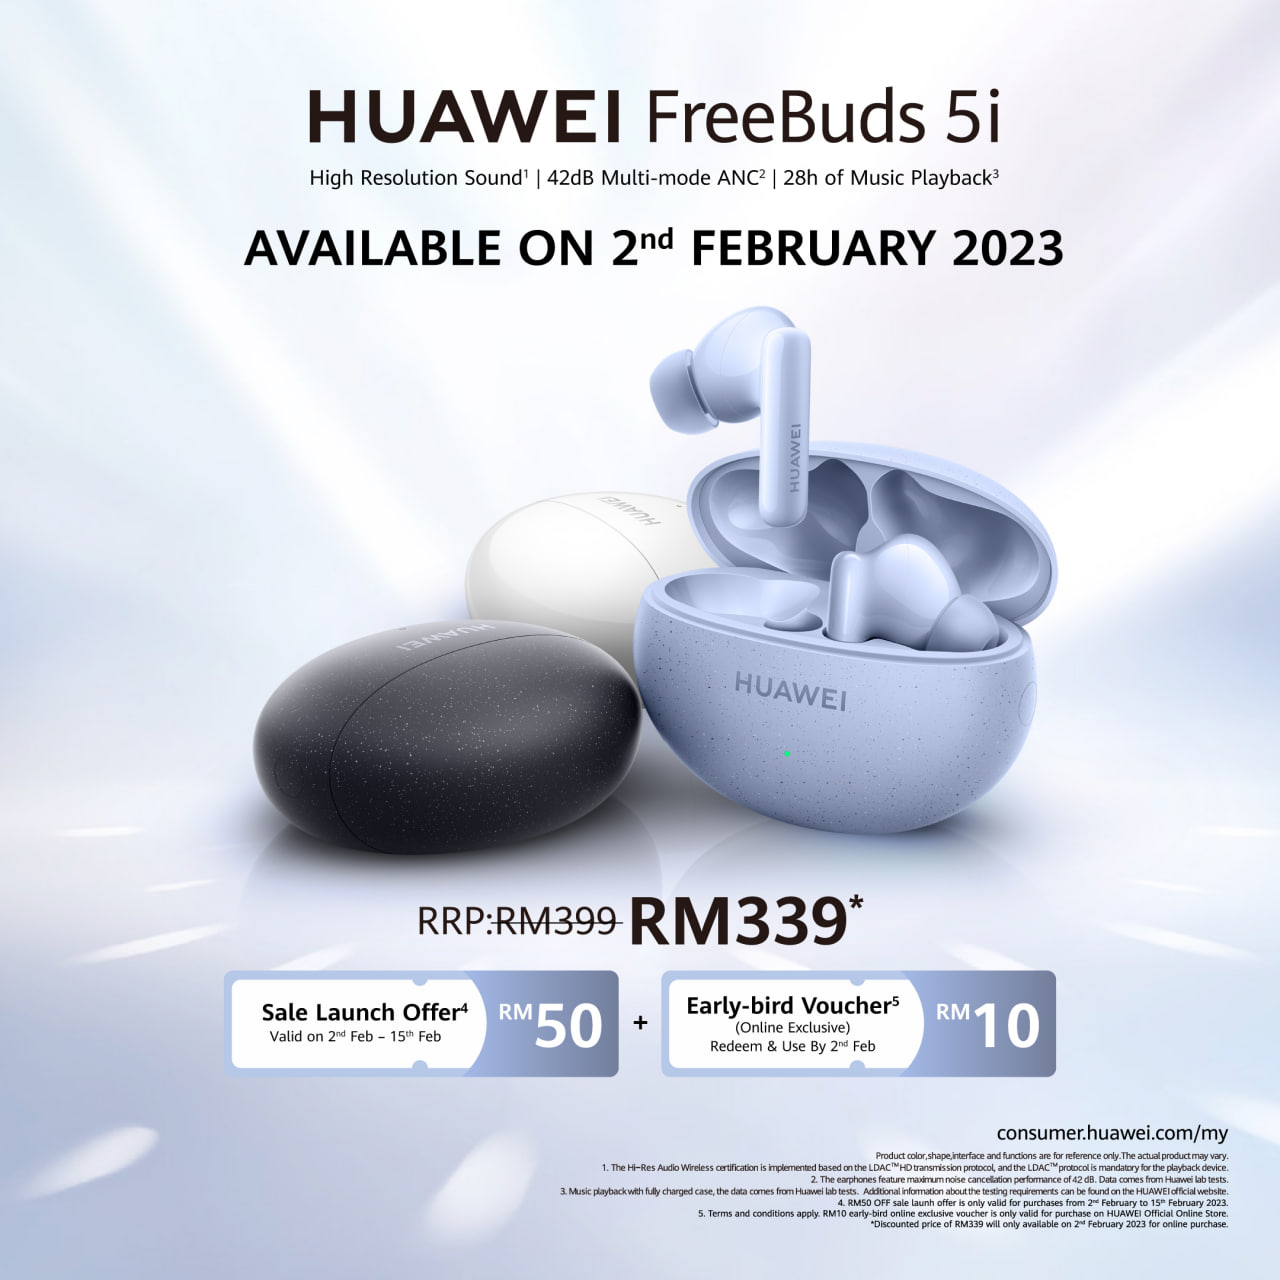 Huawei FreeBuds 5i brings RM60 off on first purchase in Malaysia